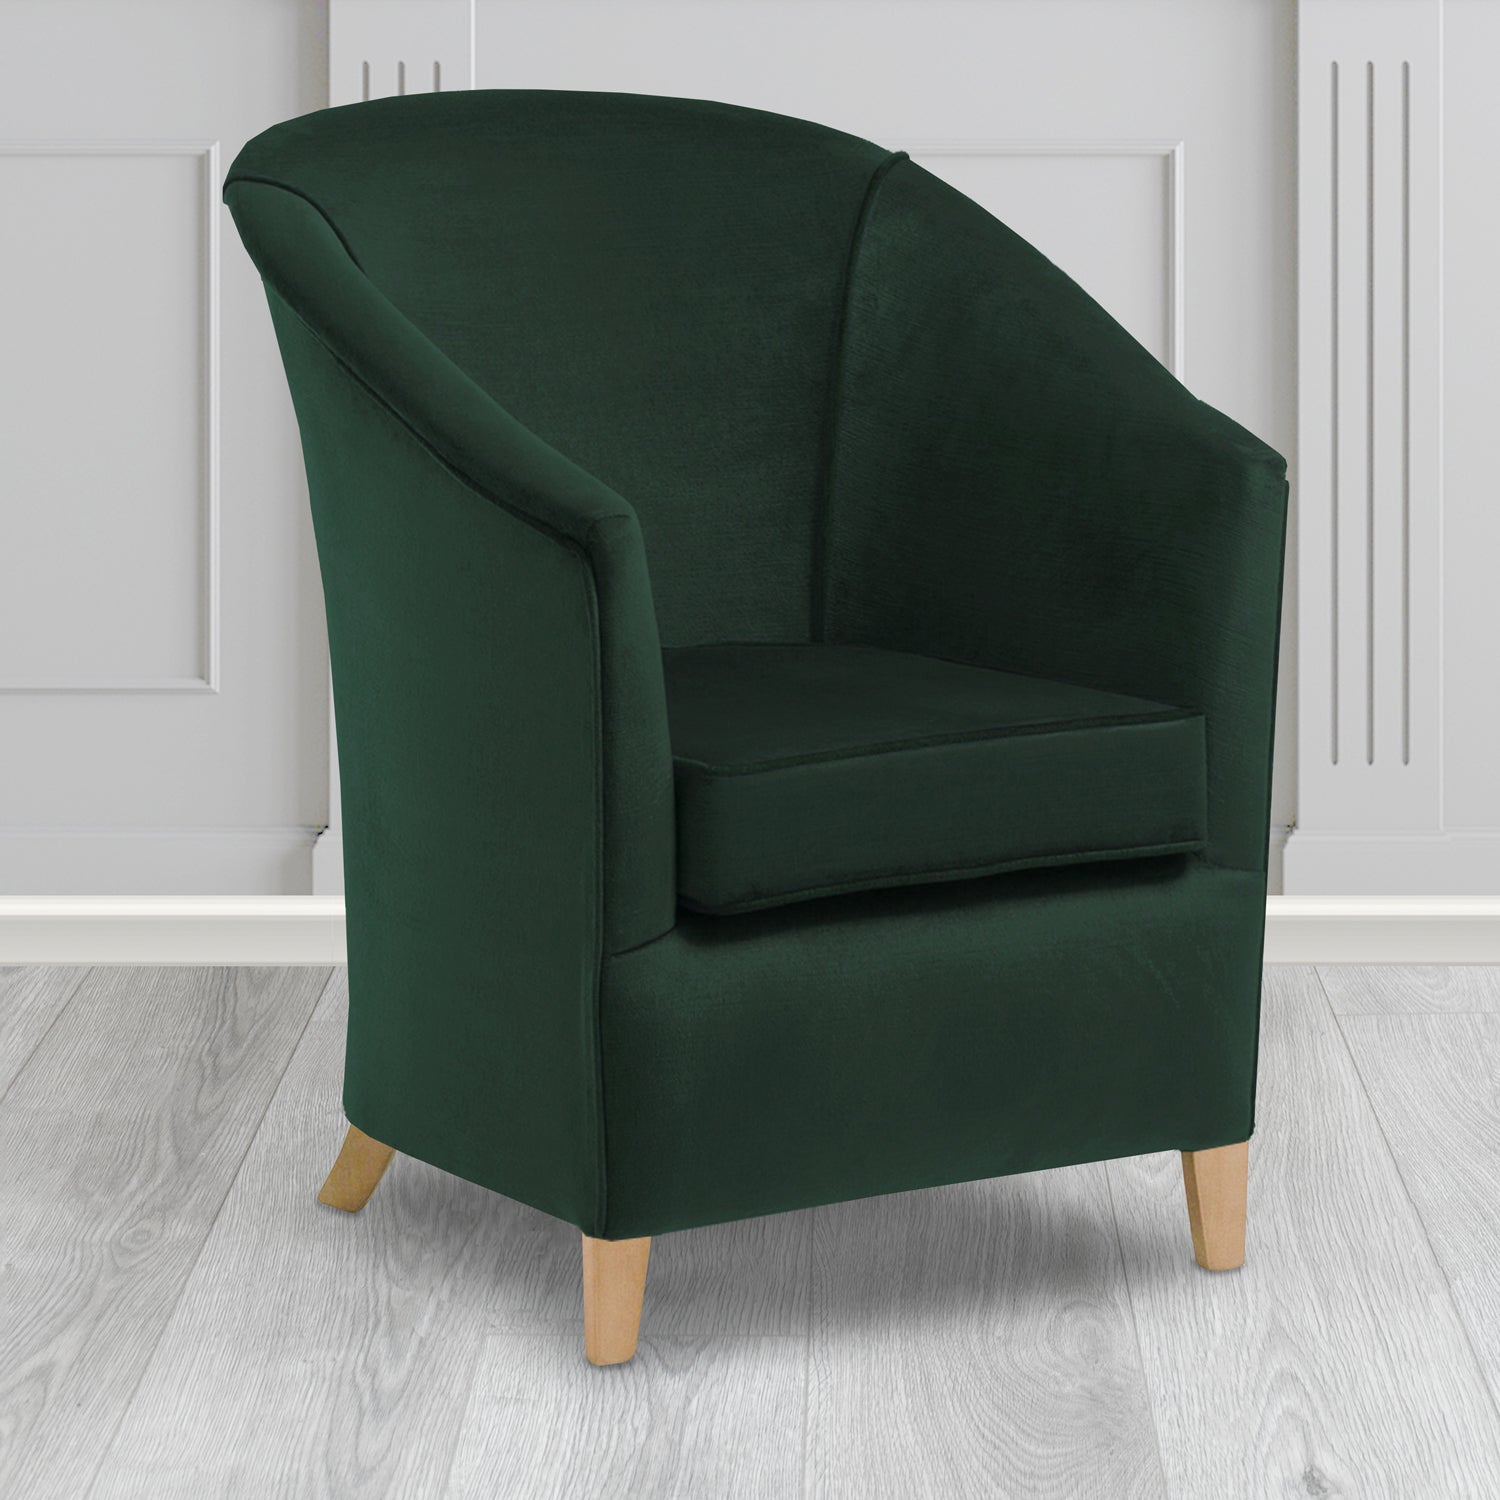 Bolton Tub Chair in Noble 228 Bottle Green Crib 5 Velvet Fabric - Water Resistant - The Tub Chair Shop